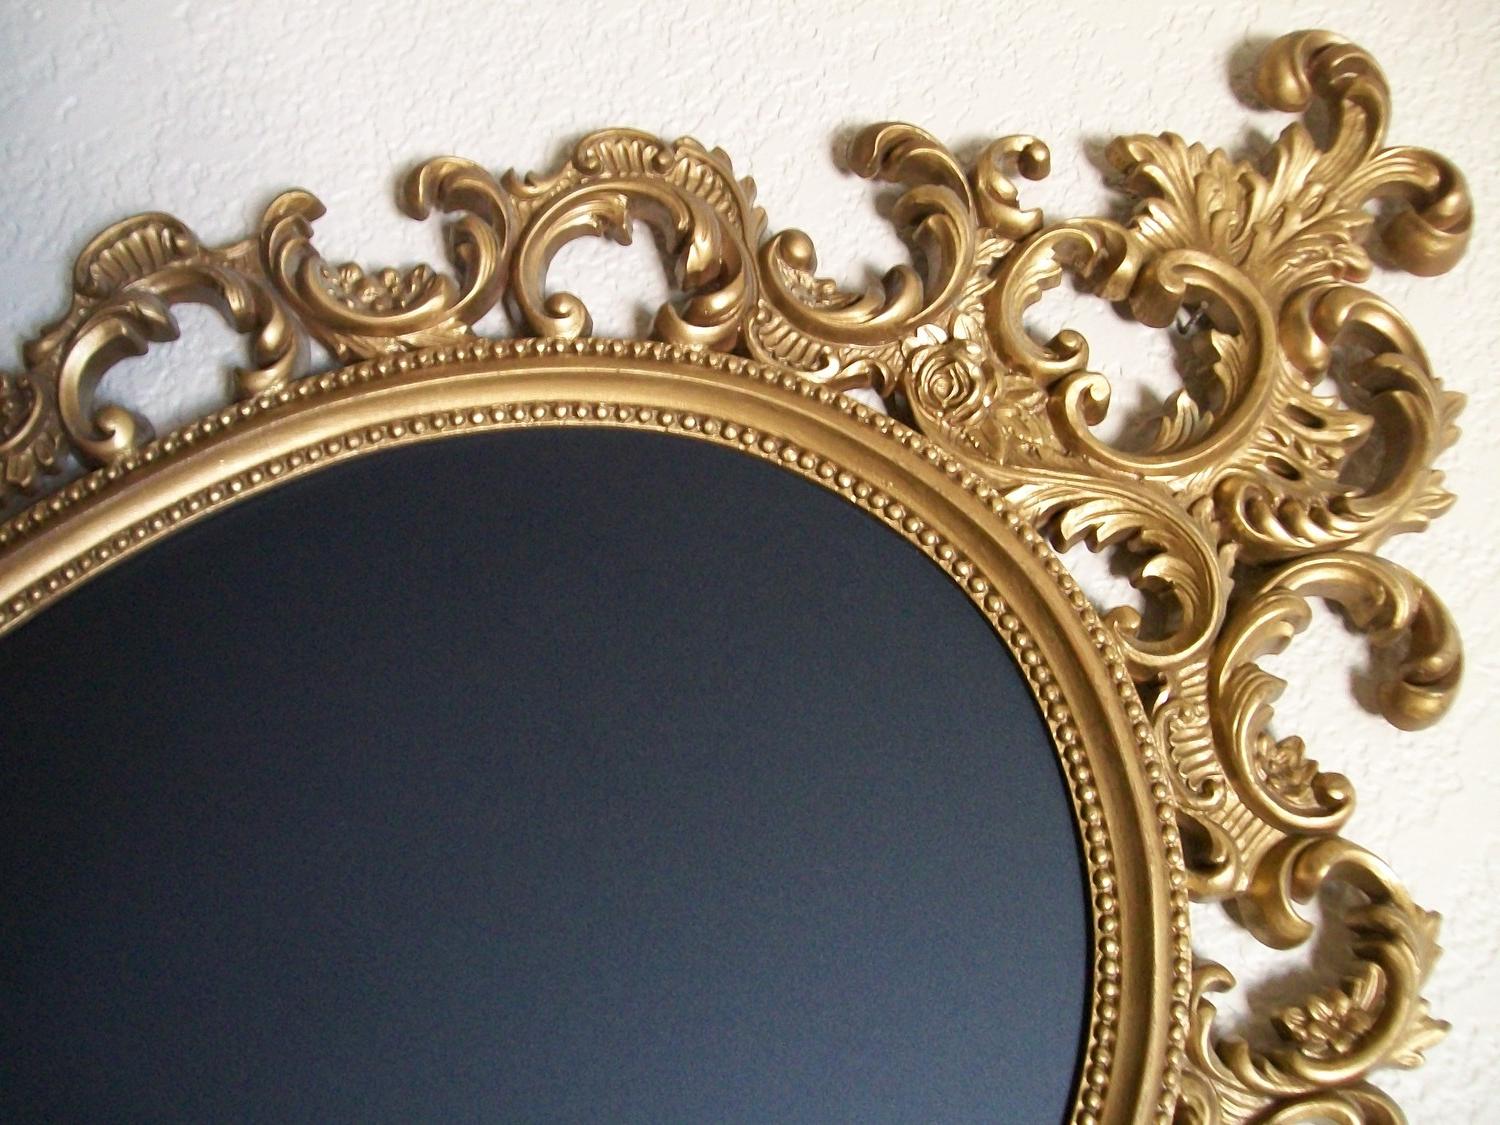 FRENCH COUNTRY DECOR-Any Color Or Gold-Chic Lg Baroque Ornate Framed